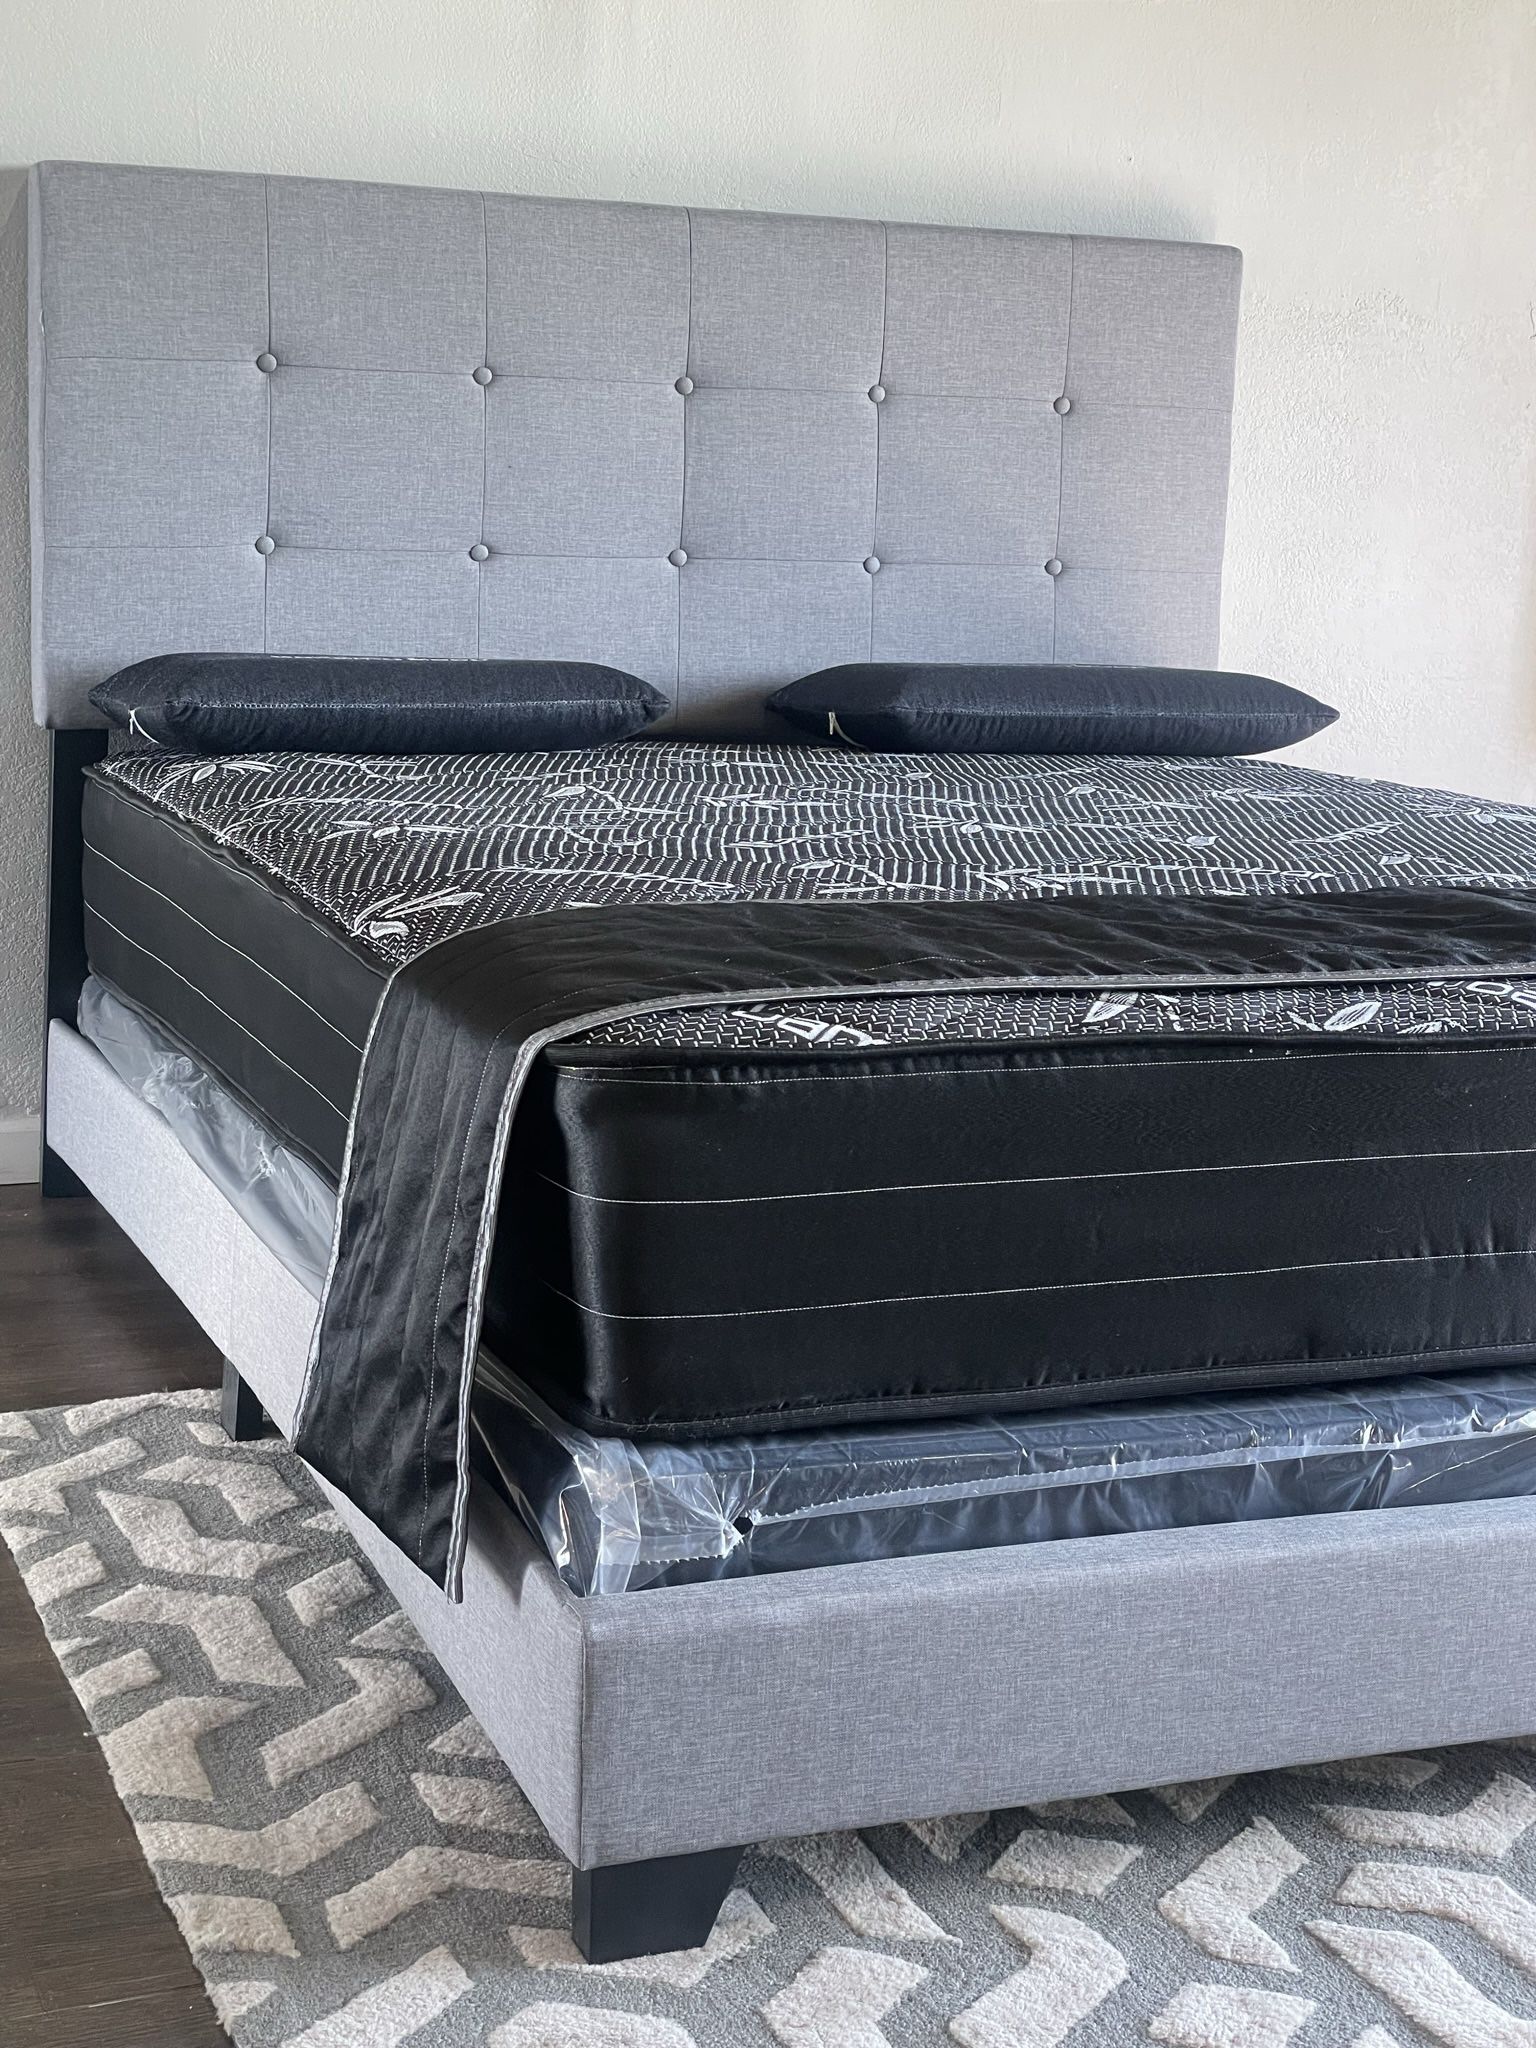 New Linen Bed Plus Mattress (Free Delivery)$299 Full )($319 Queen )($399 King 